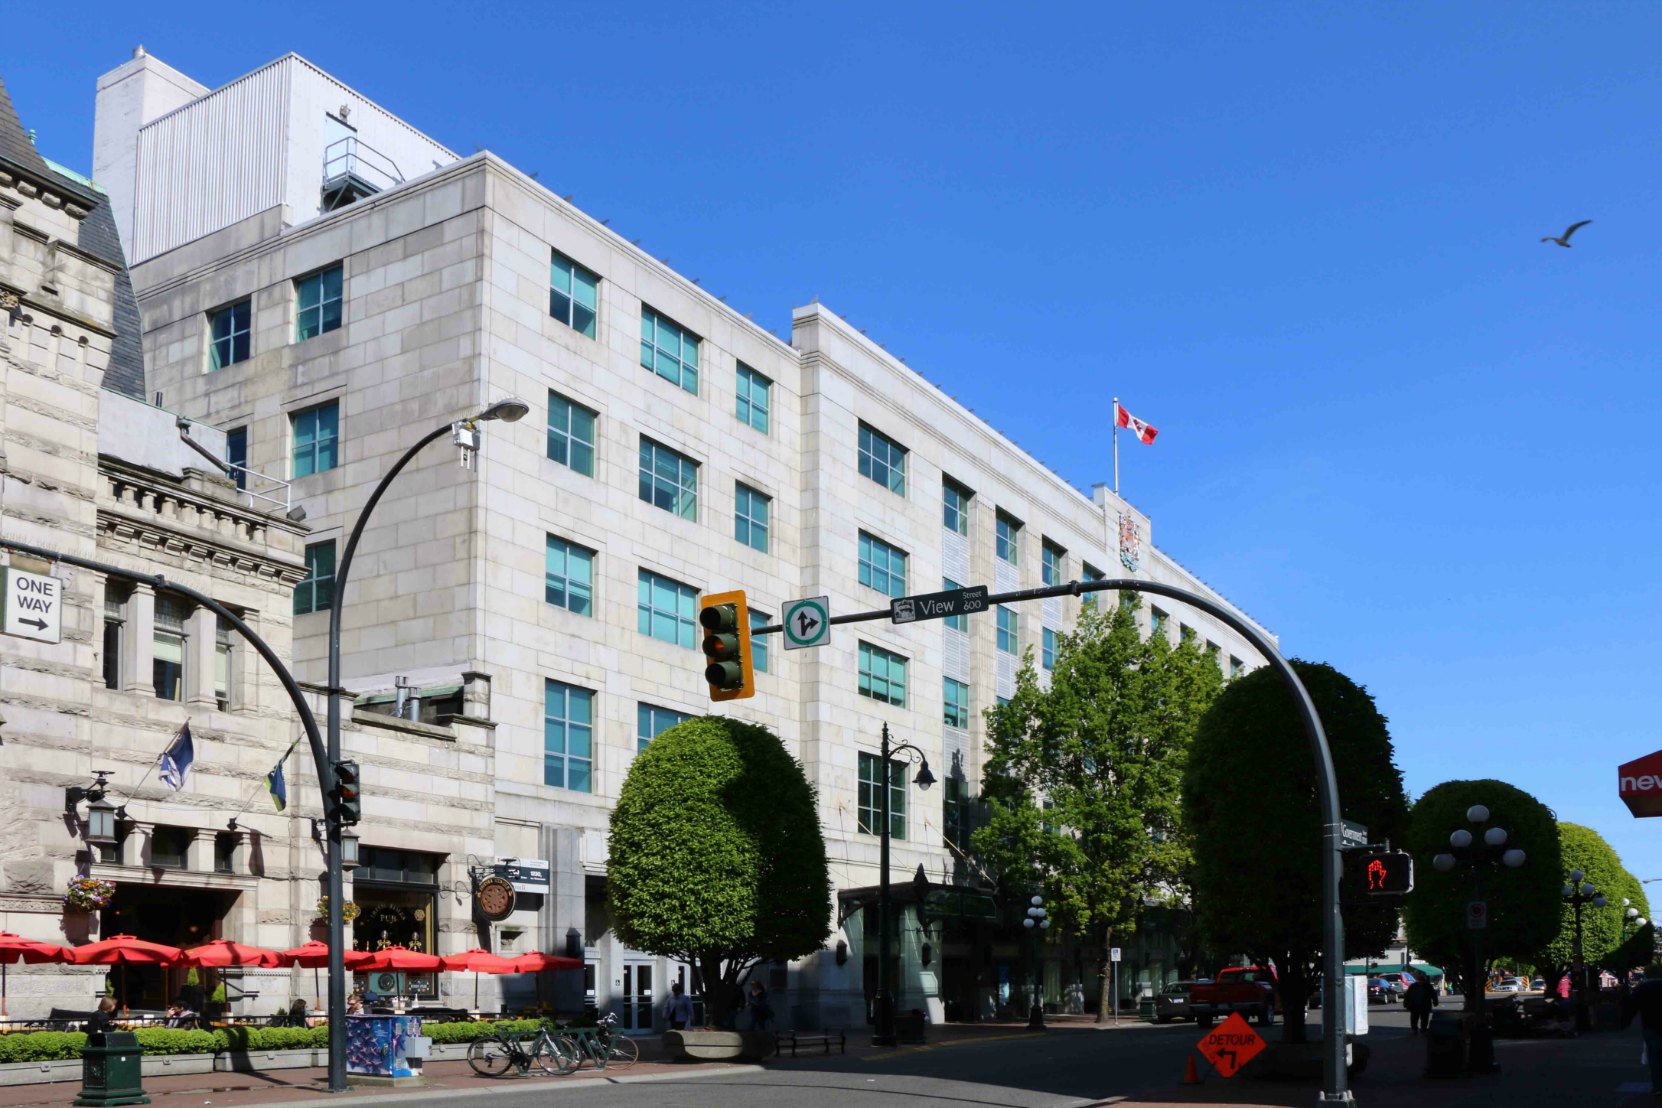 The Federal Building, 1230 Government Street, built in 1948-1952 by architects Percy Leonard James and Douglas James for the Government of Canada.